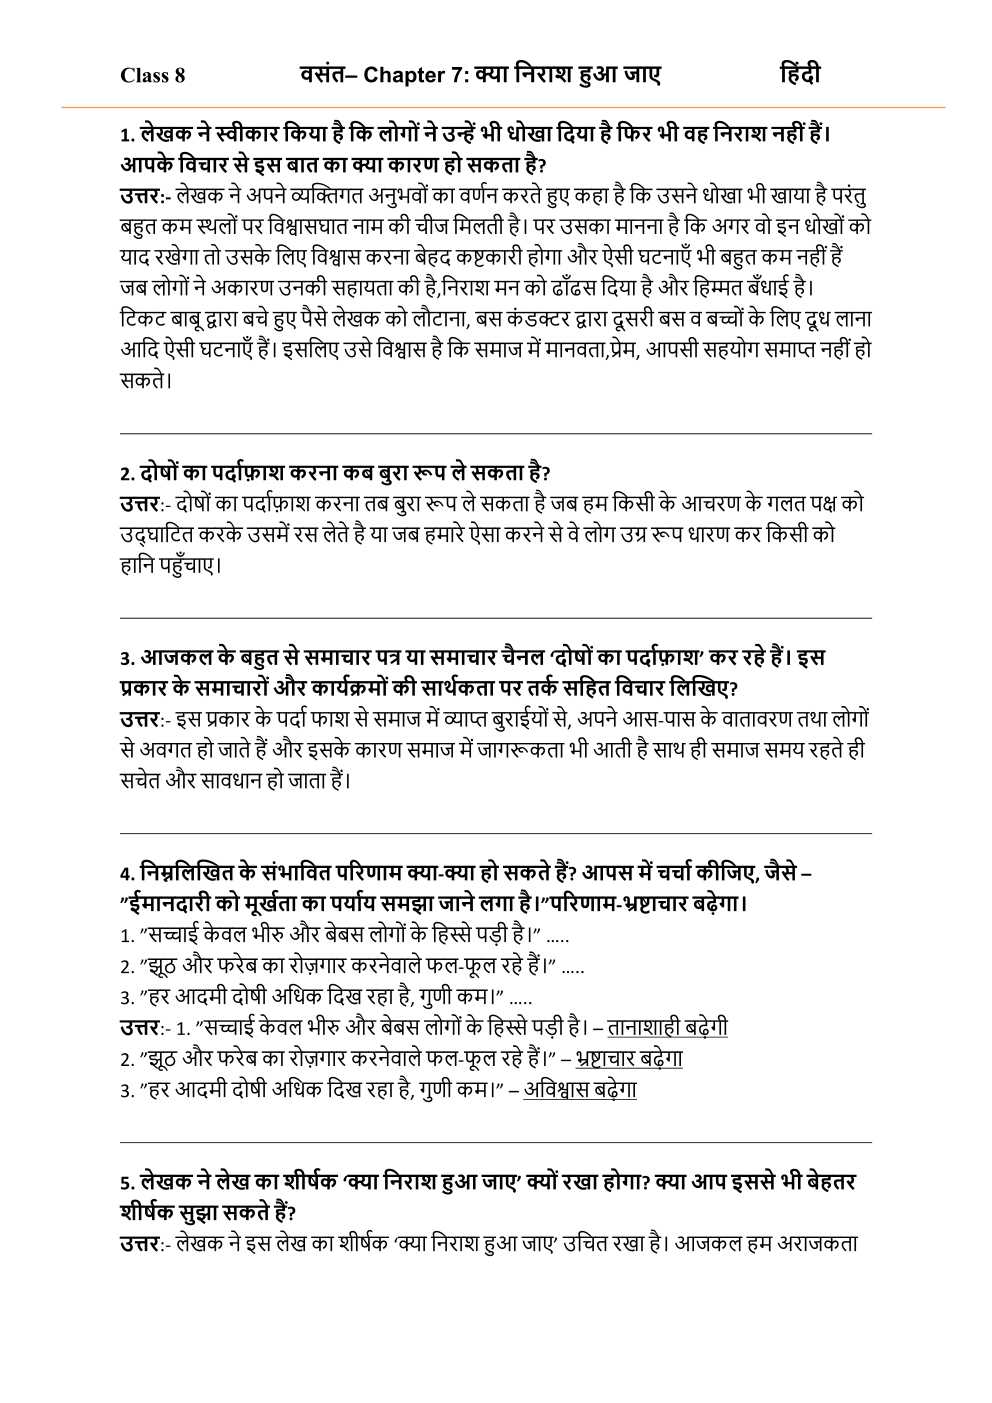 NCERT Solutions For Class 8 Hindi Vasant Chapter 7